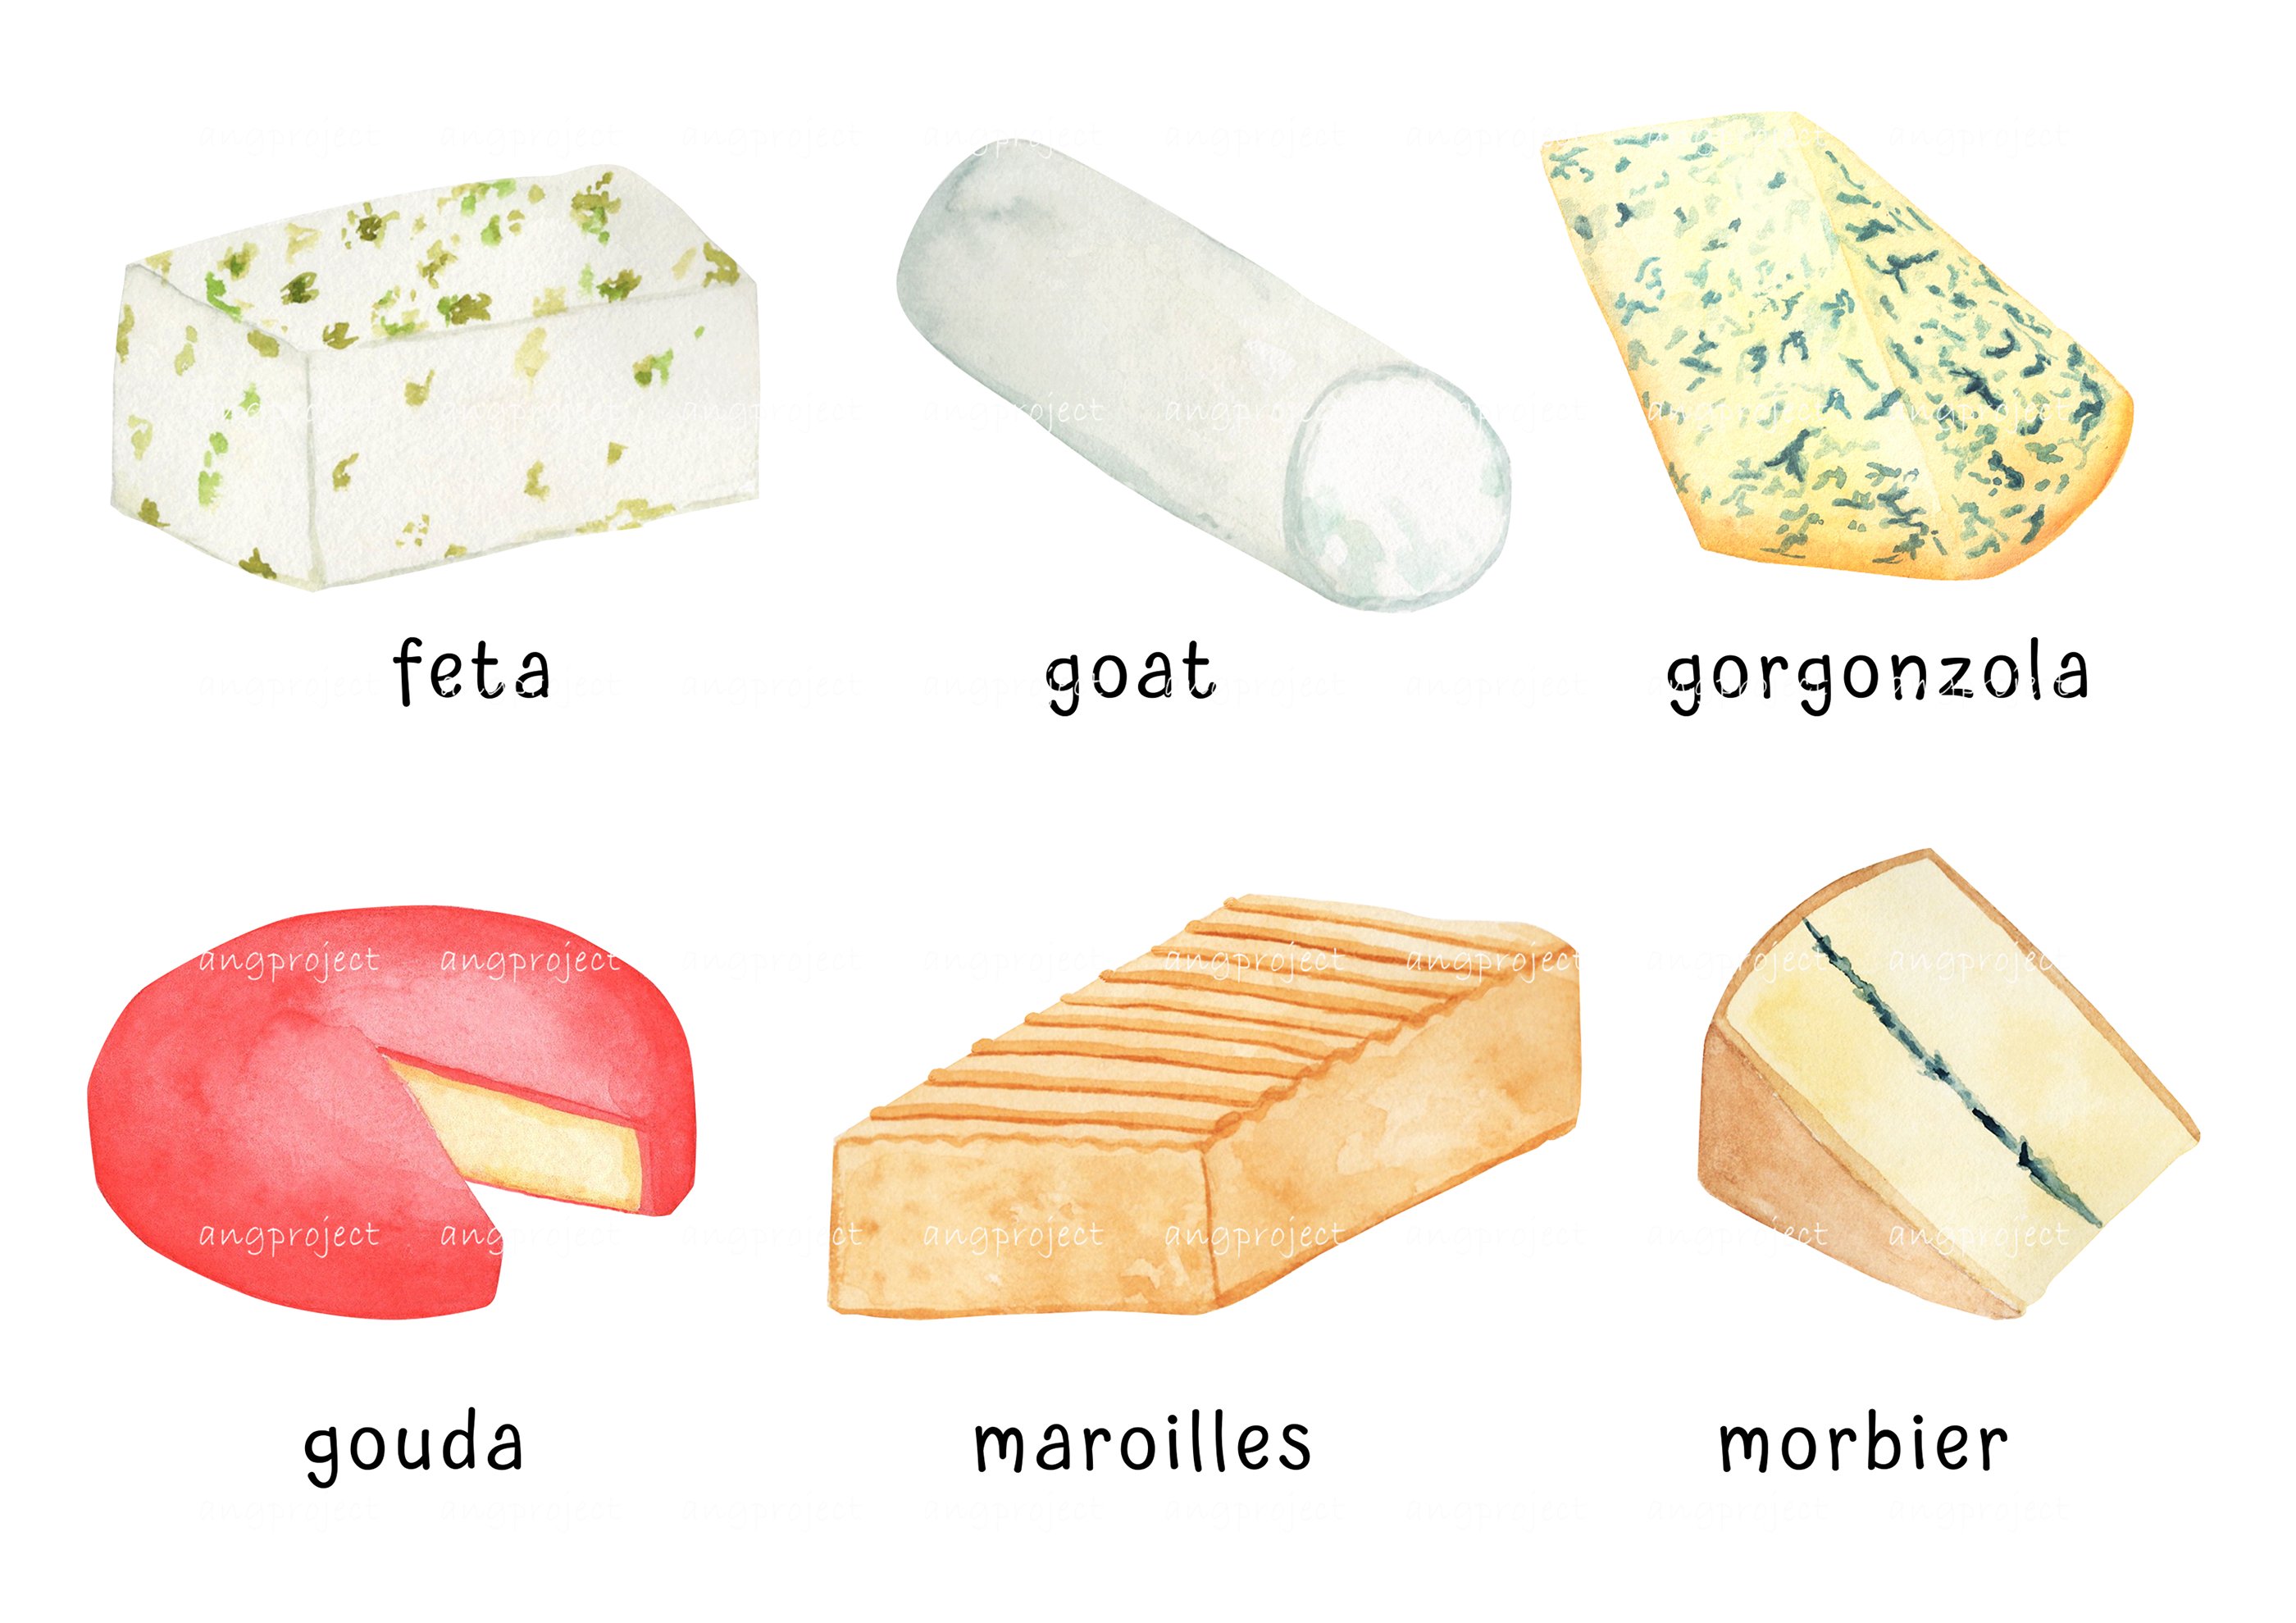 Selection of colorful images of gourmet cheeses.